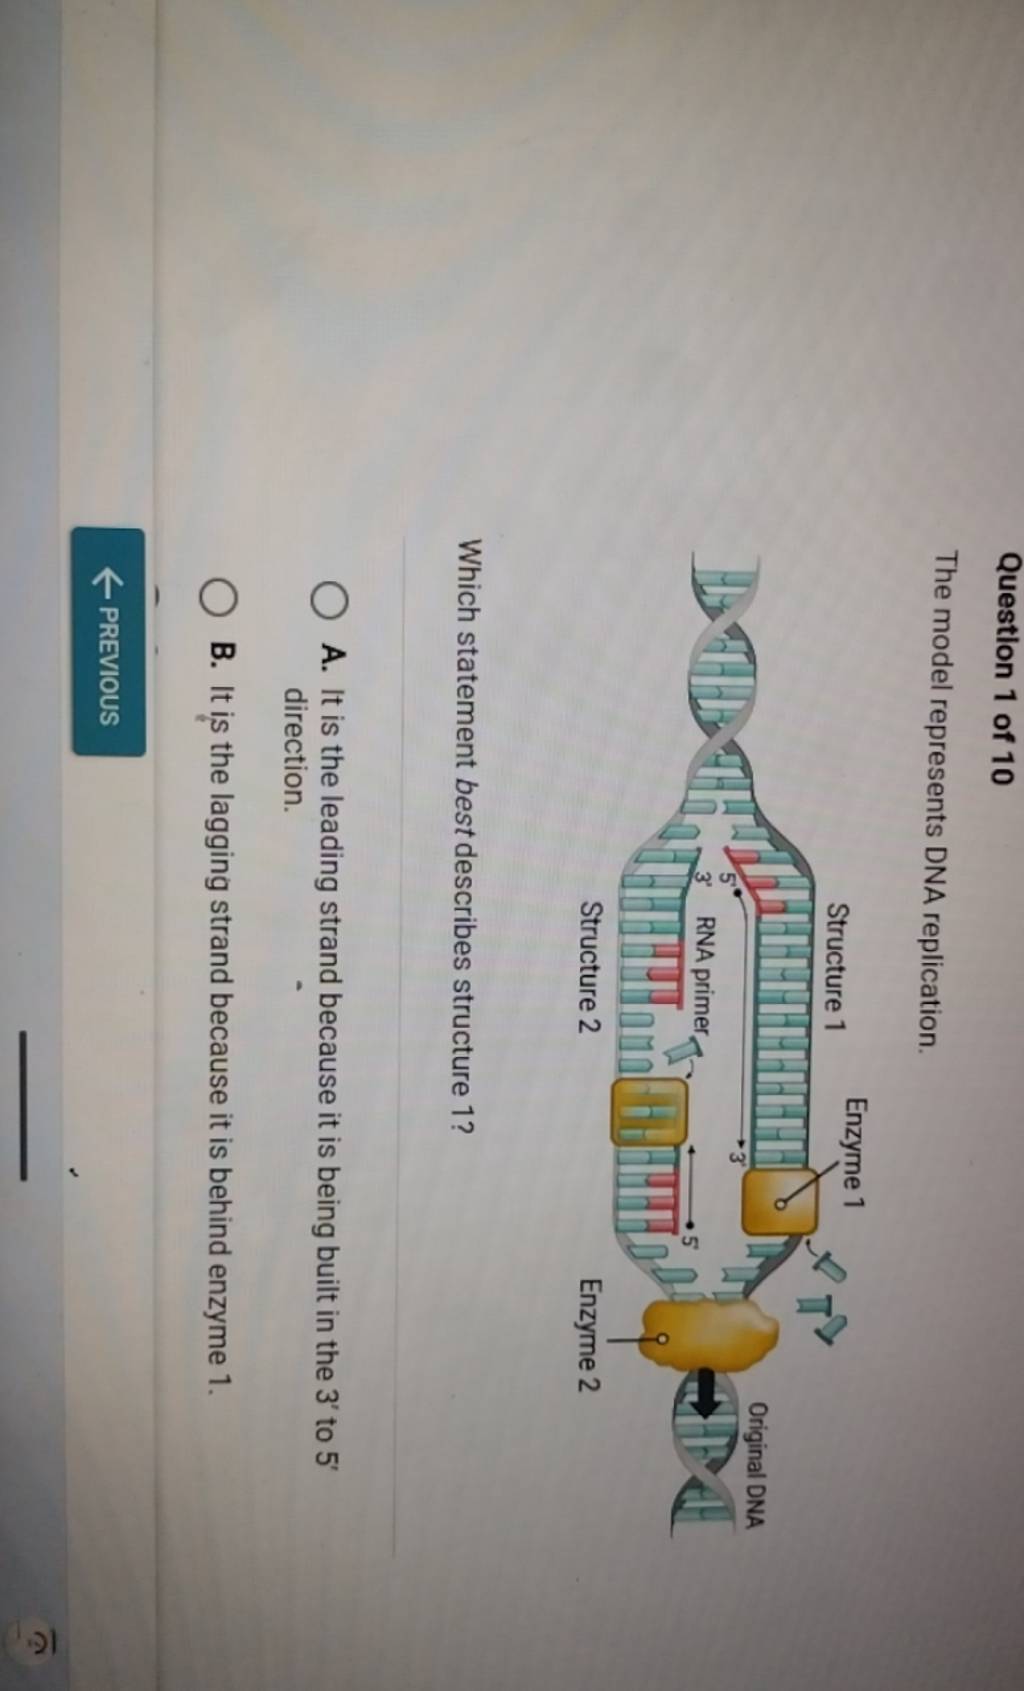 Question 1 of 10
The model represents DNA replication.
Structure 2
Enz